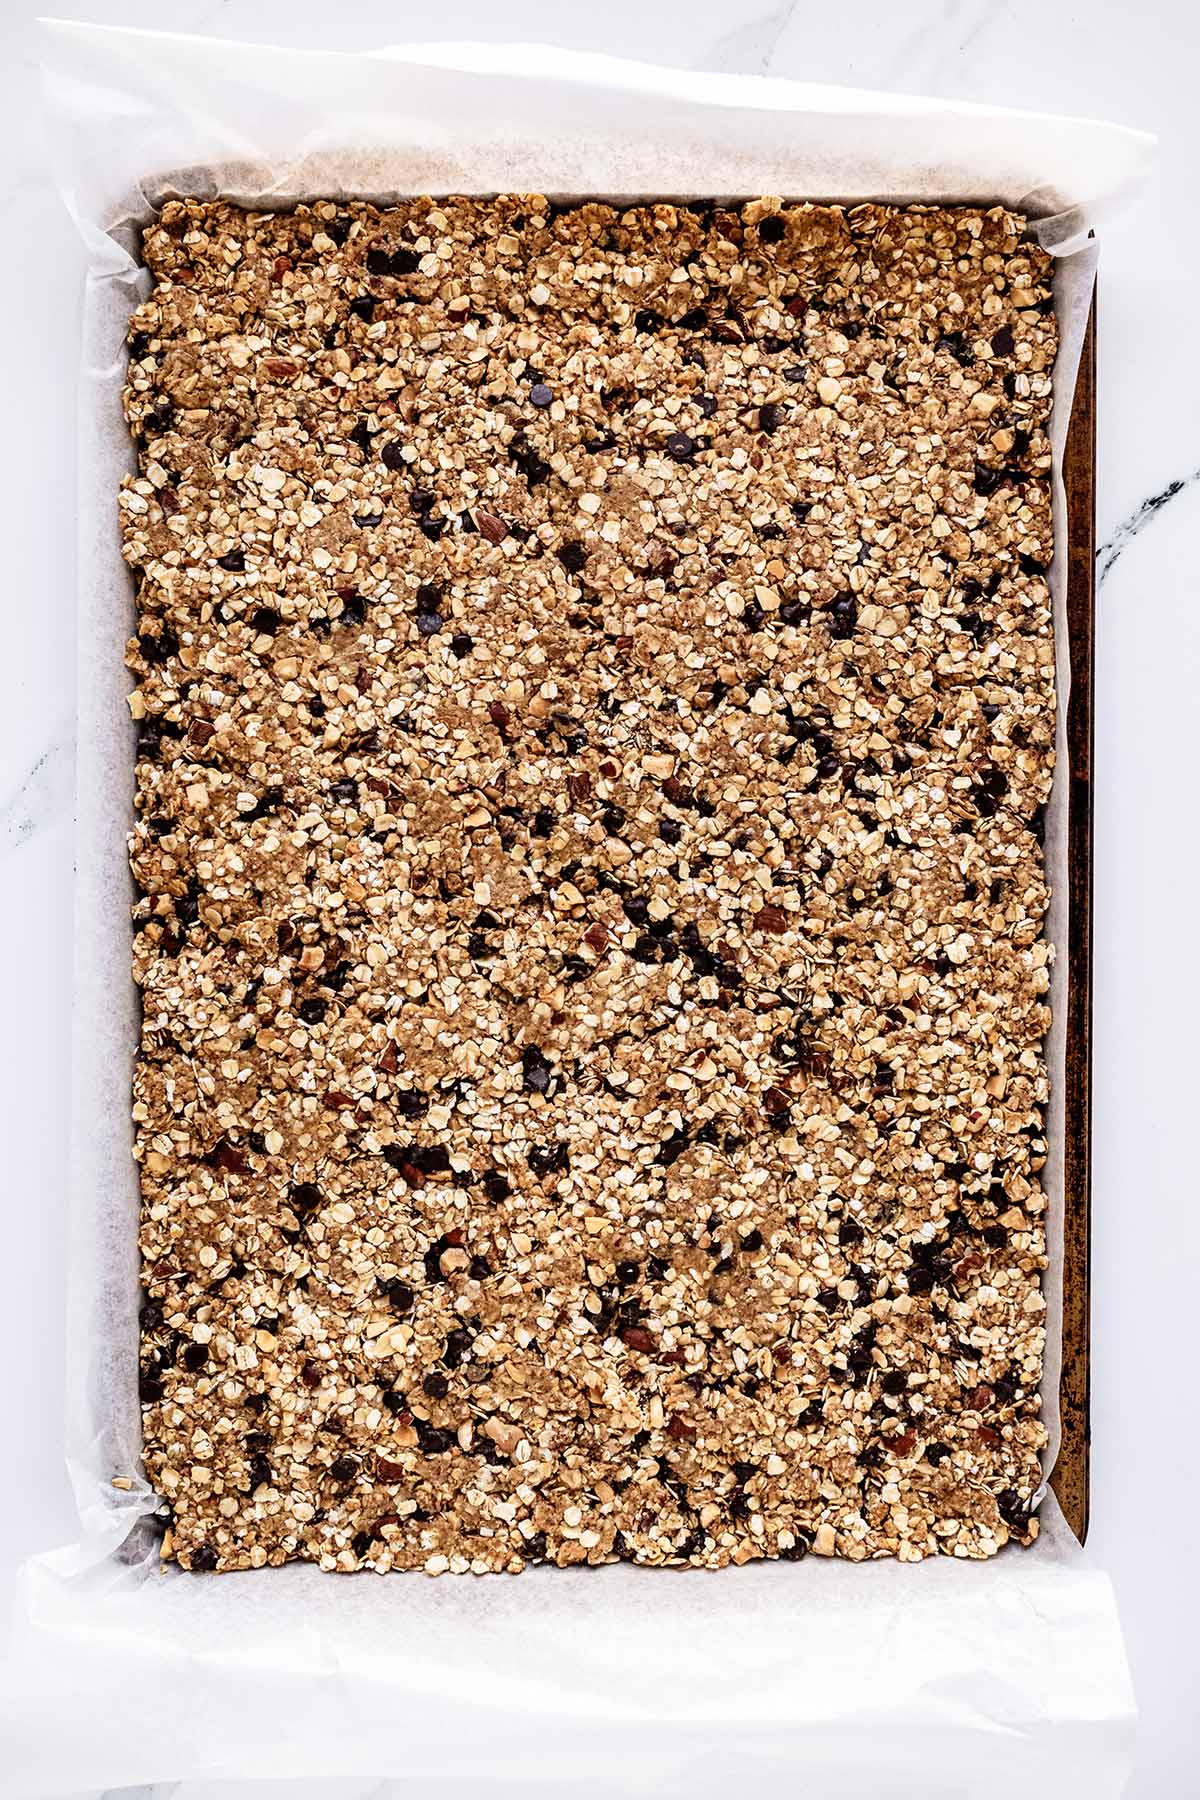 Overhead view of oatmeal bar mixture pressed into a baking sheet